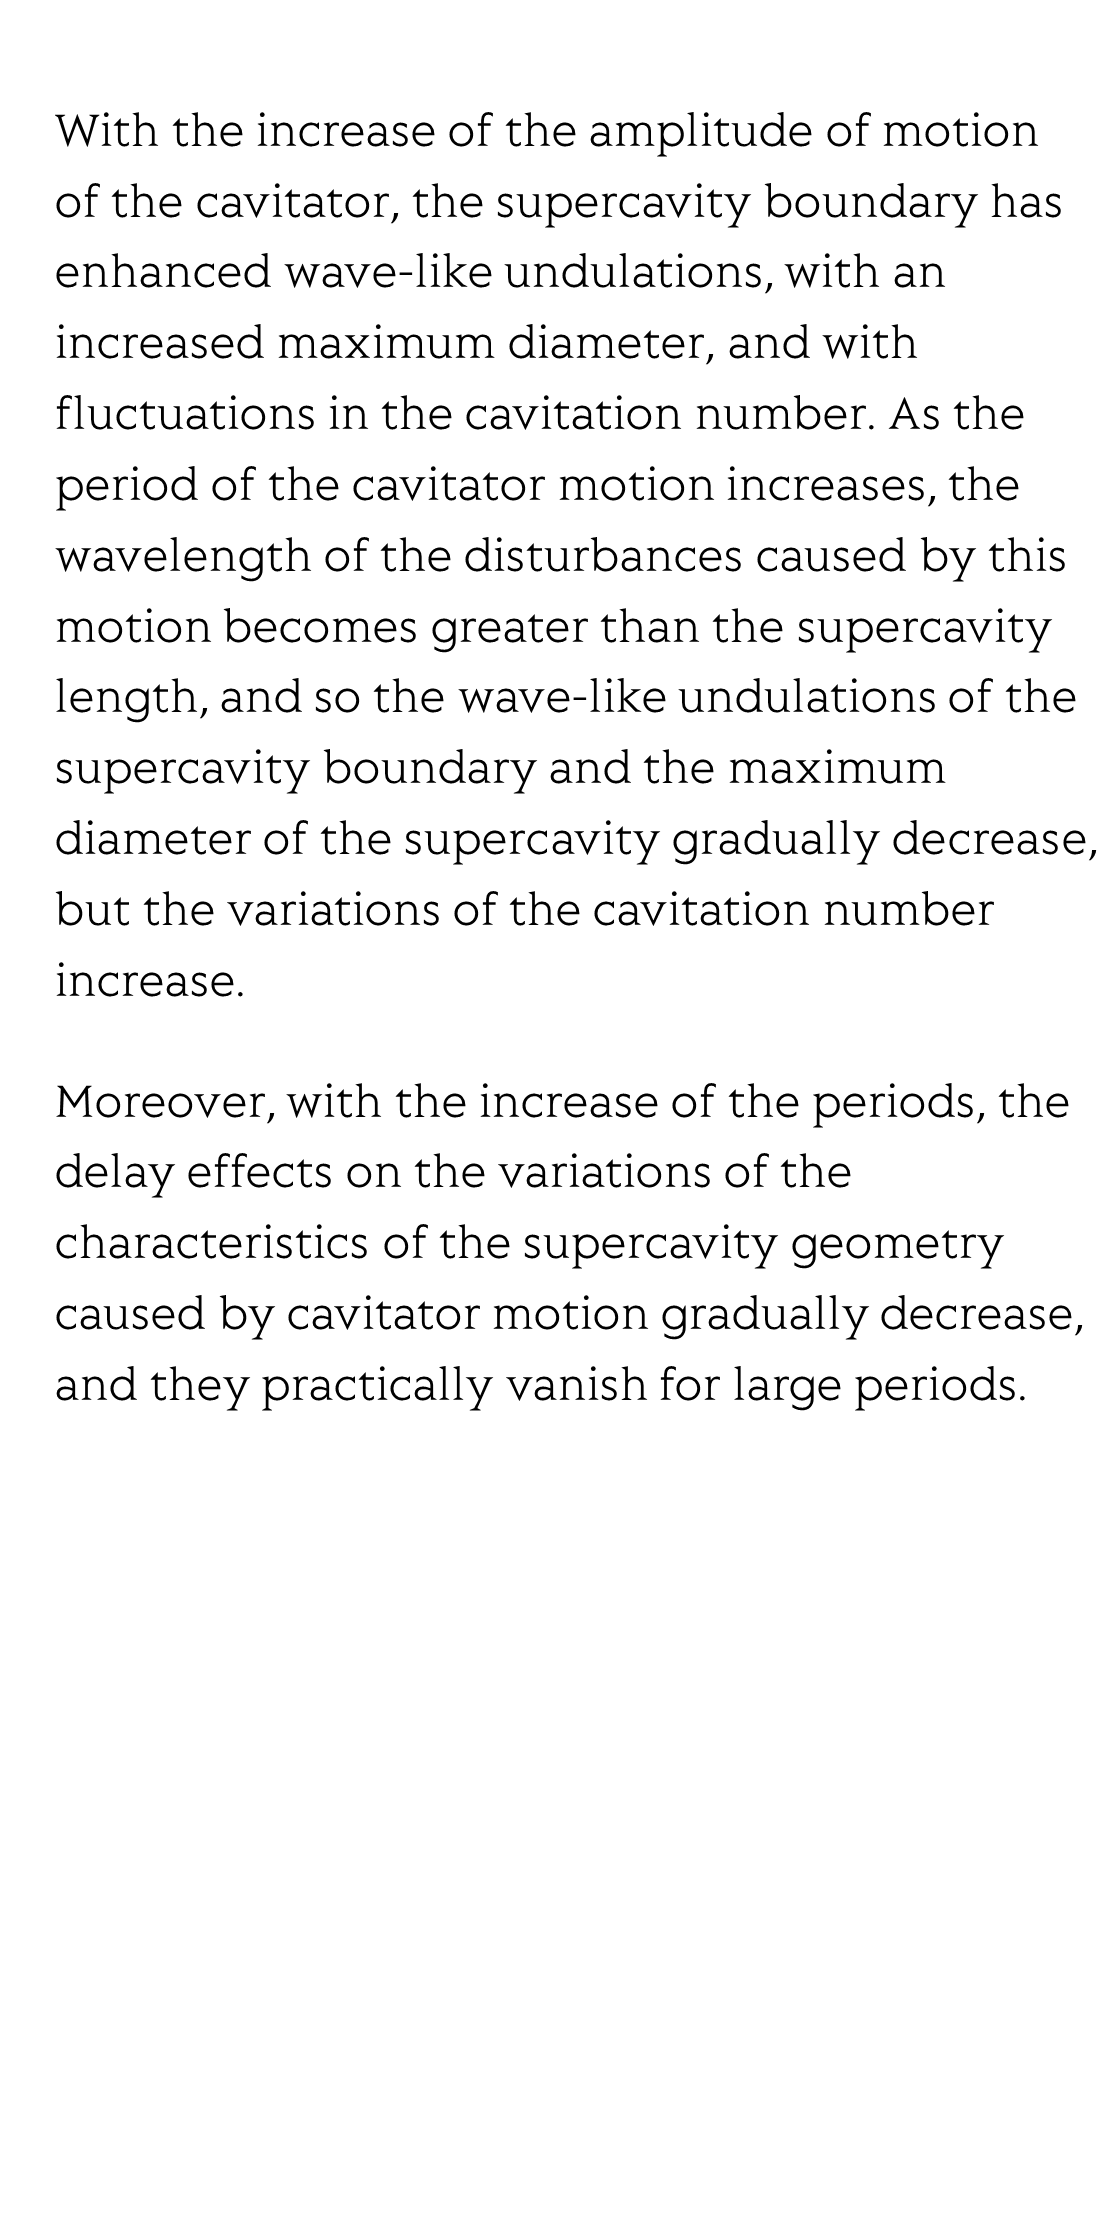 Numerical analysis of a ventilated supercavity under periodic motion of the cavitator_3